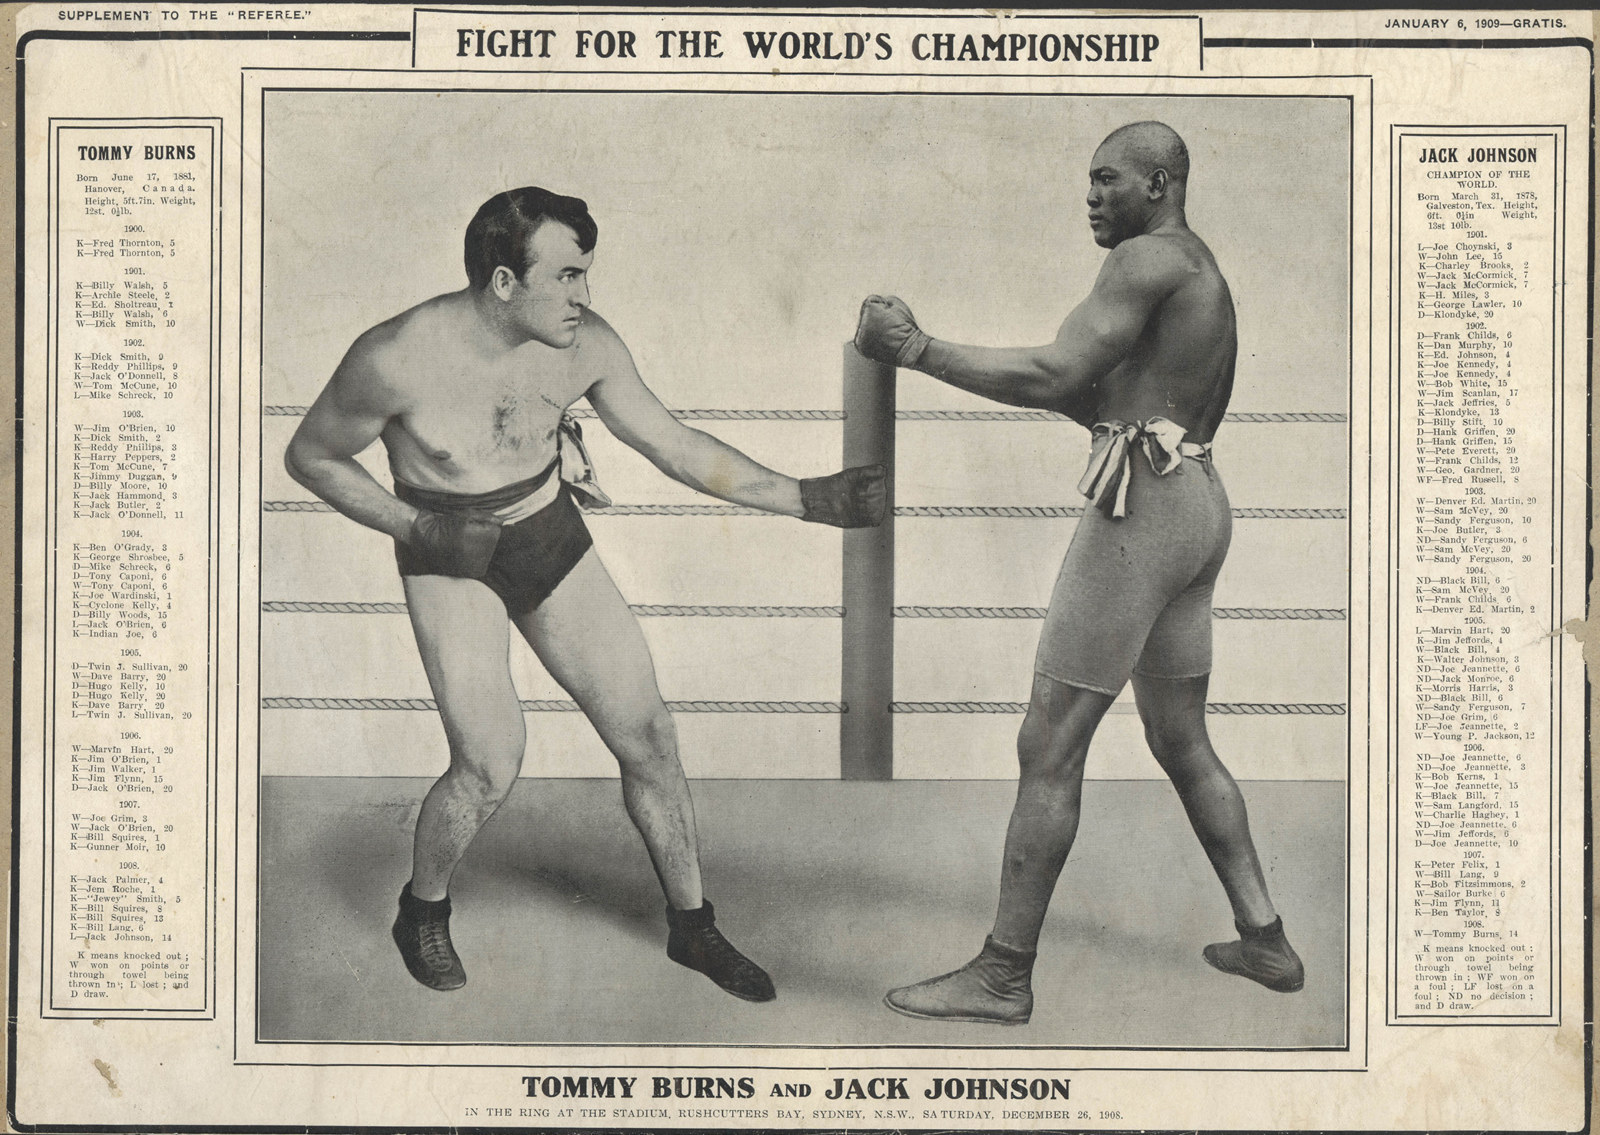 Printed souvenir of the fight with the head line 'fight for the world's championship' and image of the two boxers.